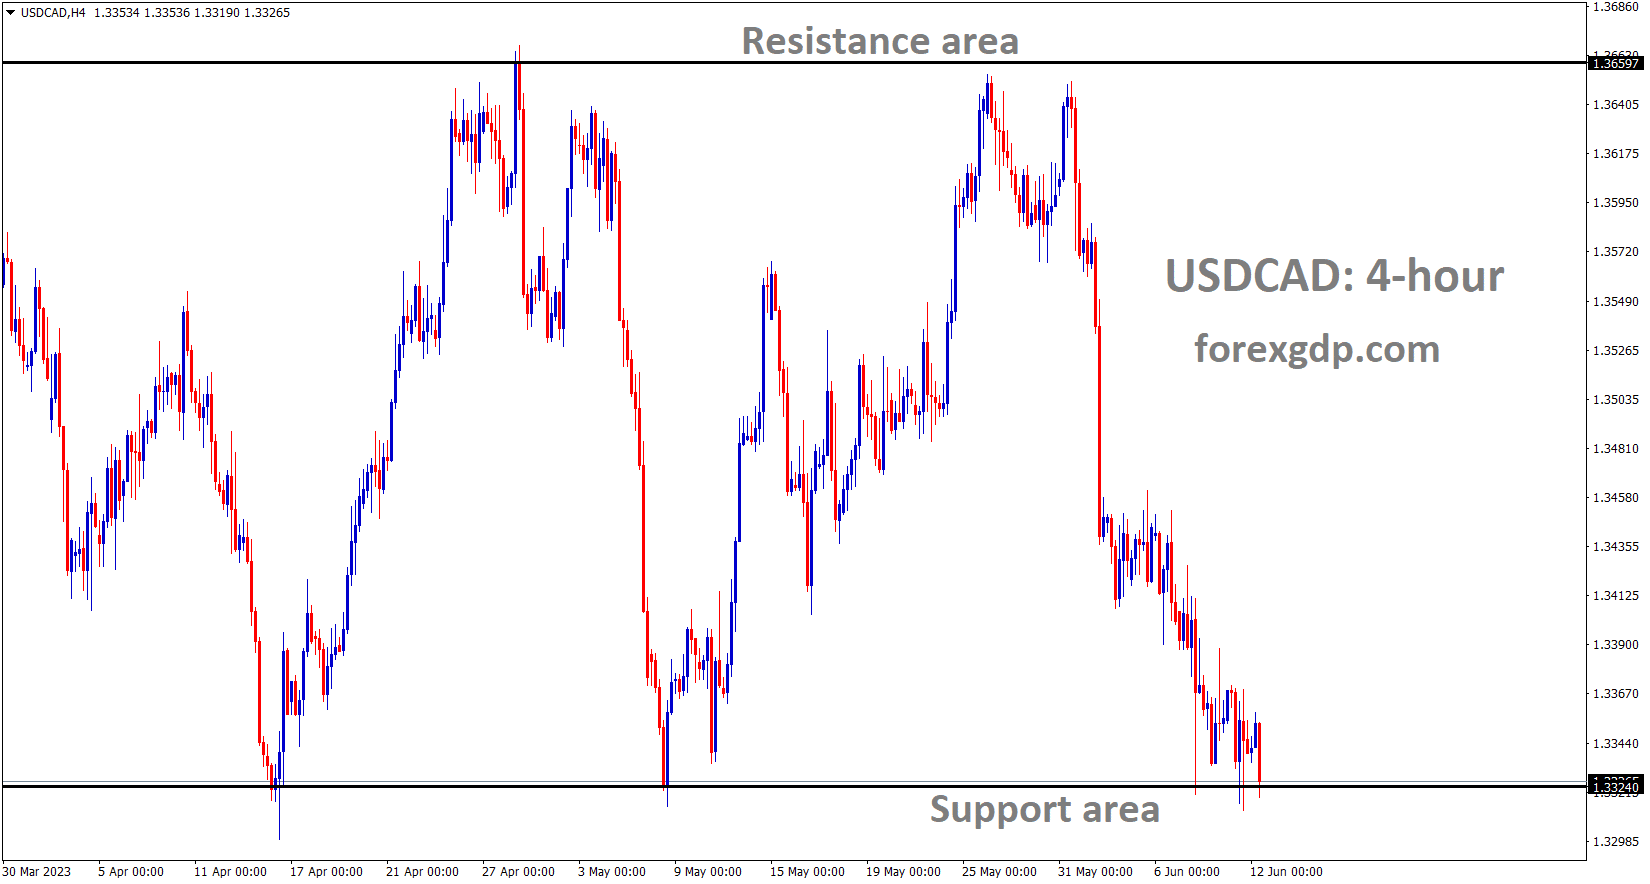 USDCAD is moving in the Box pattern and the market has reached the horizontal support area of the pattern